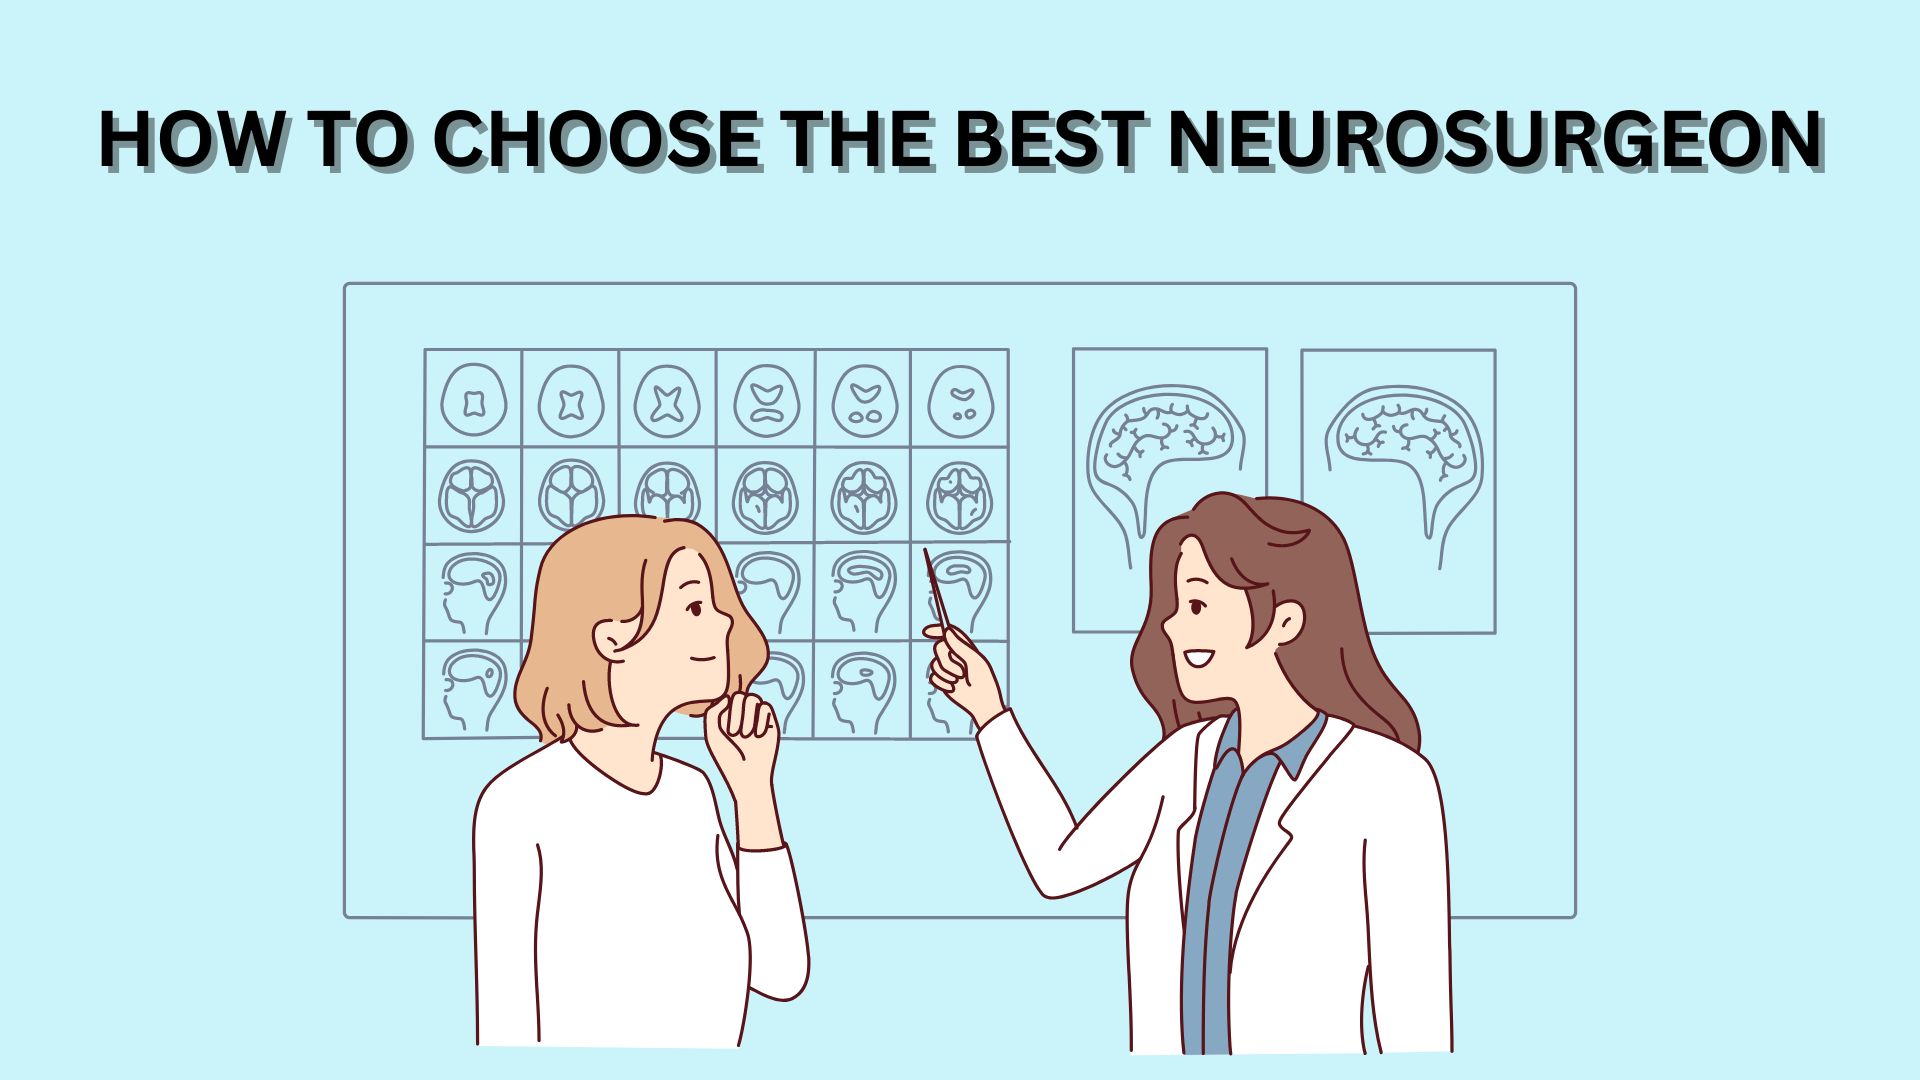 HOW TO CHOOSE THE BEST NEUROSURGEON